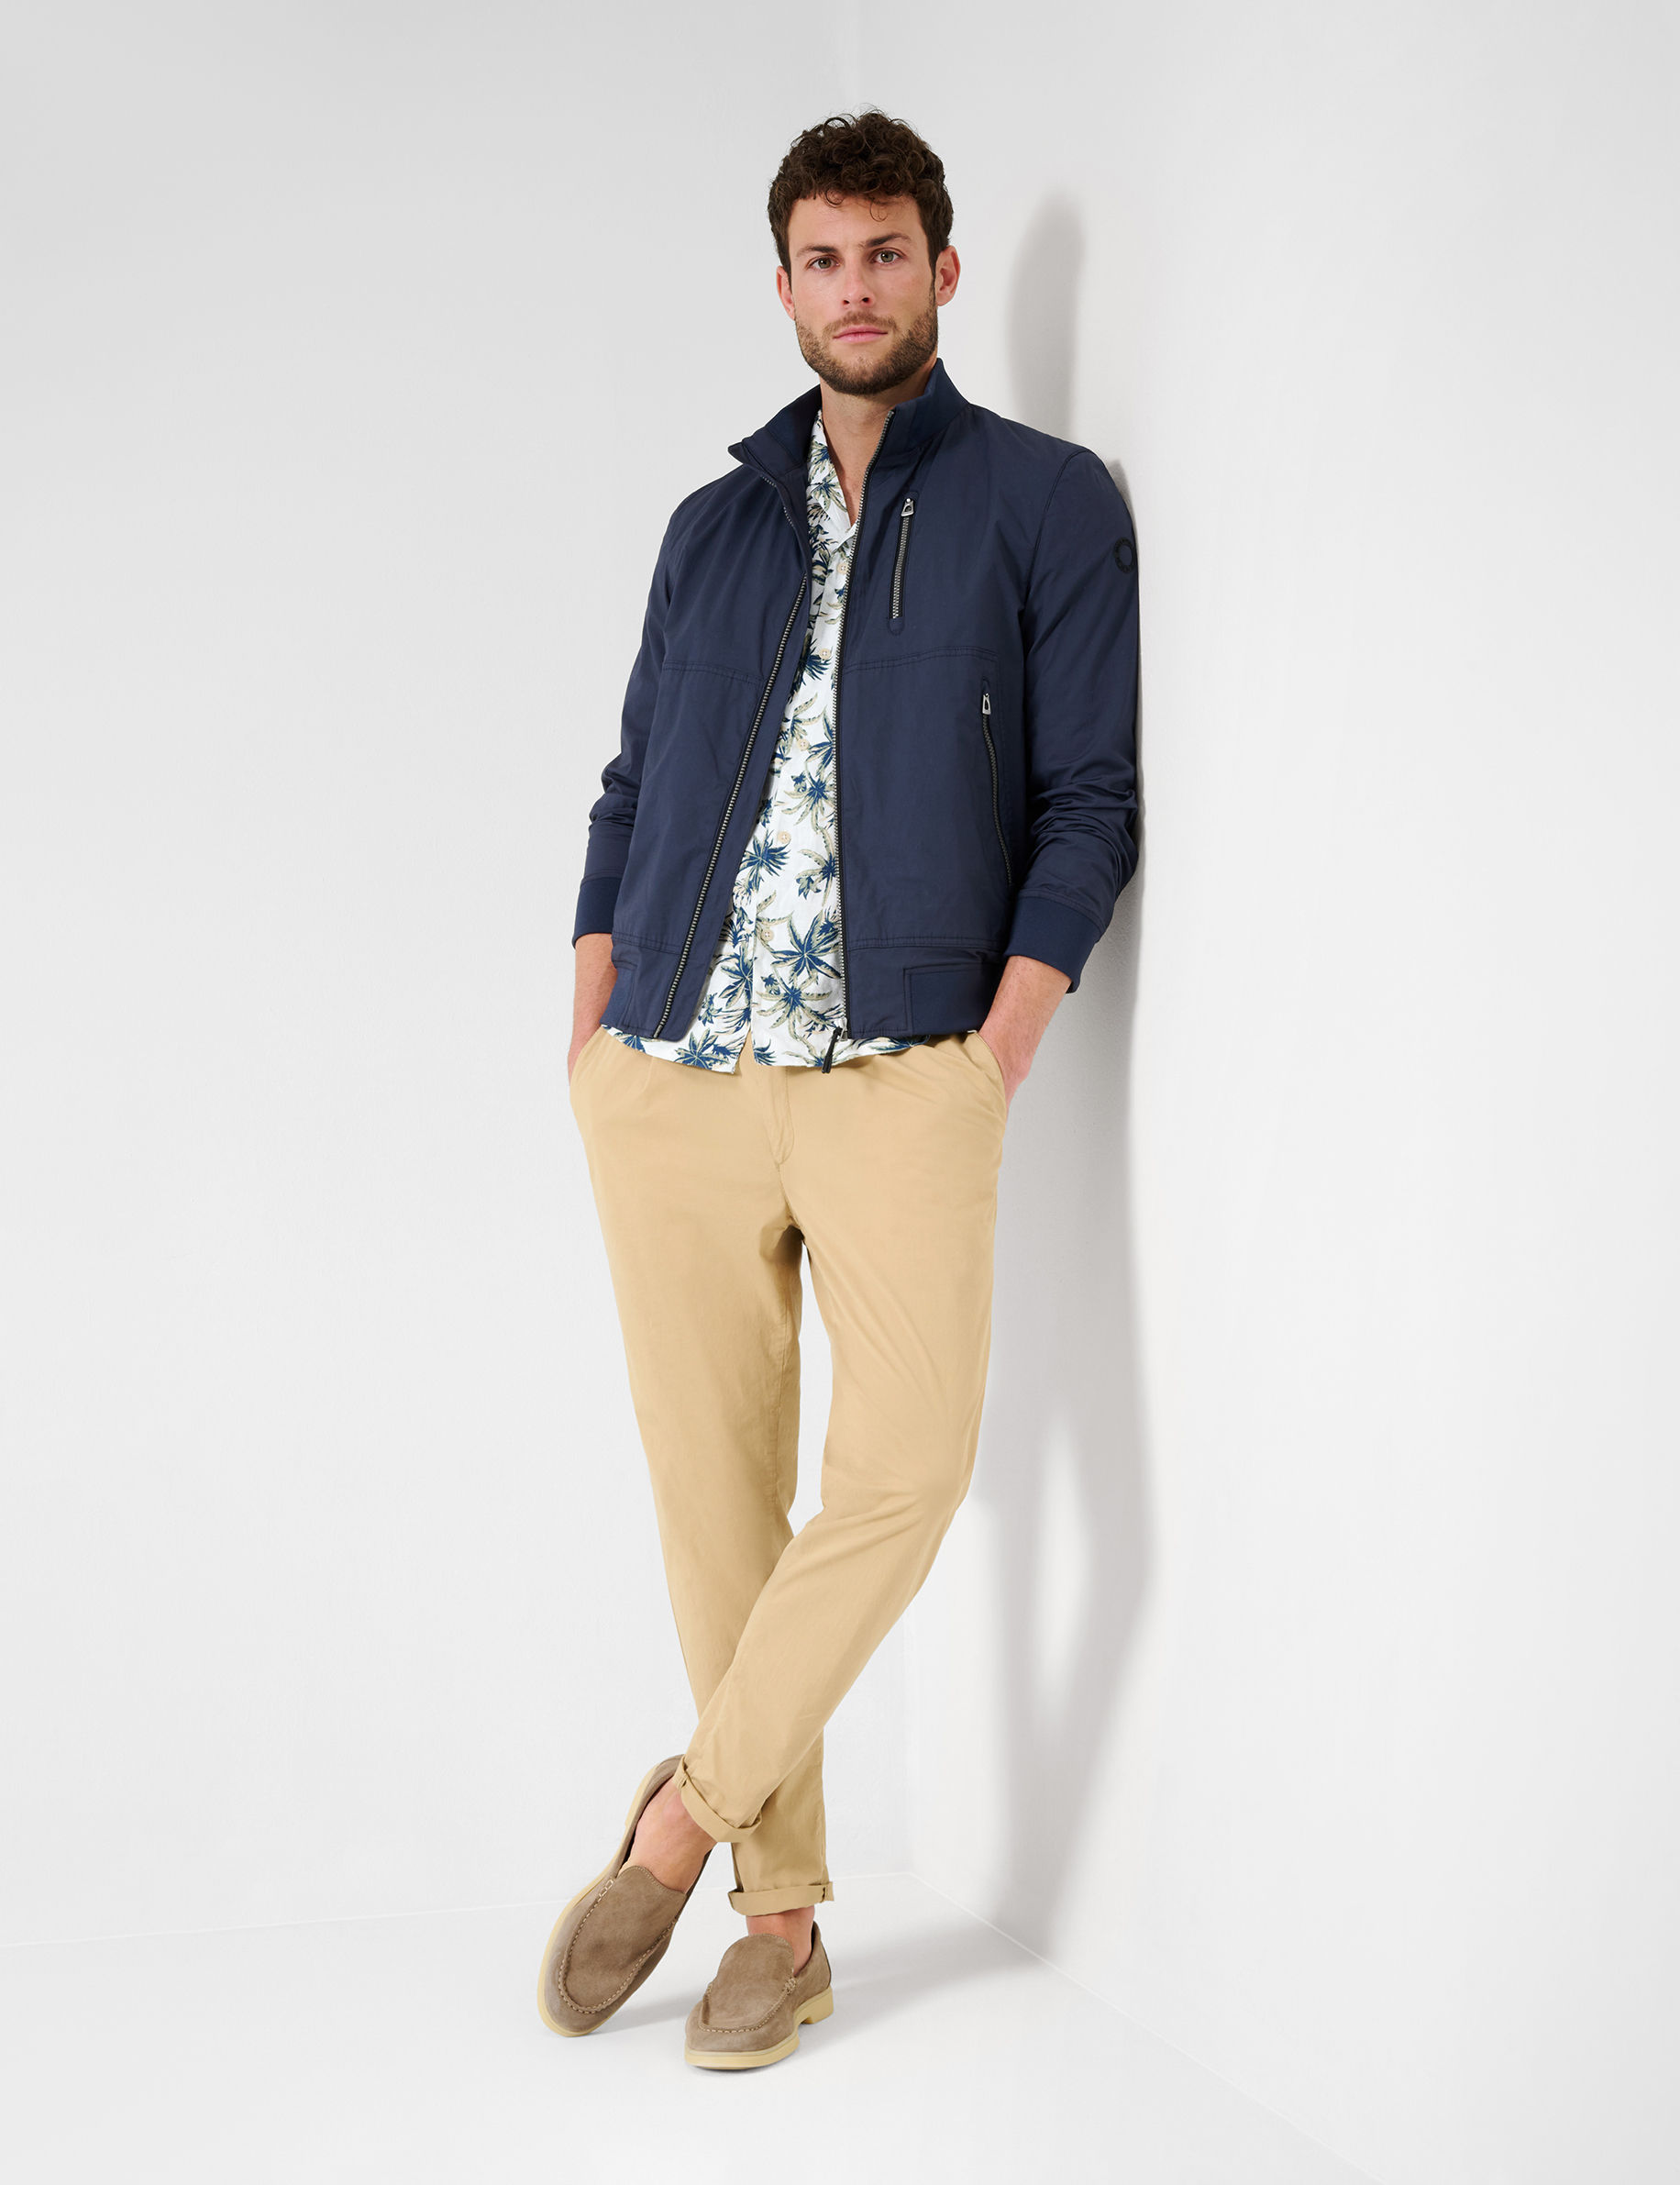 Men Style RICO manhattan  Model Outfit